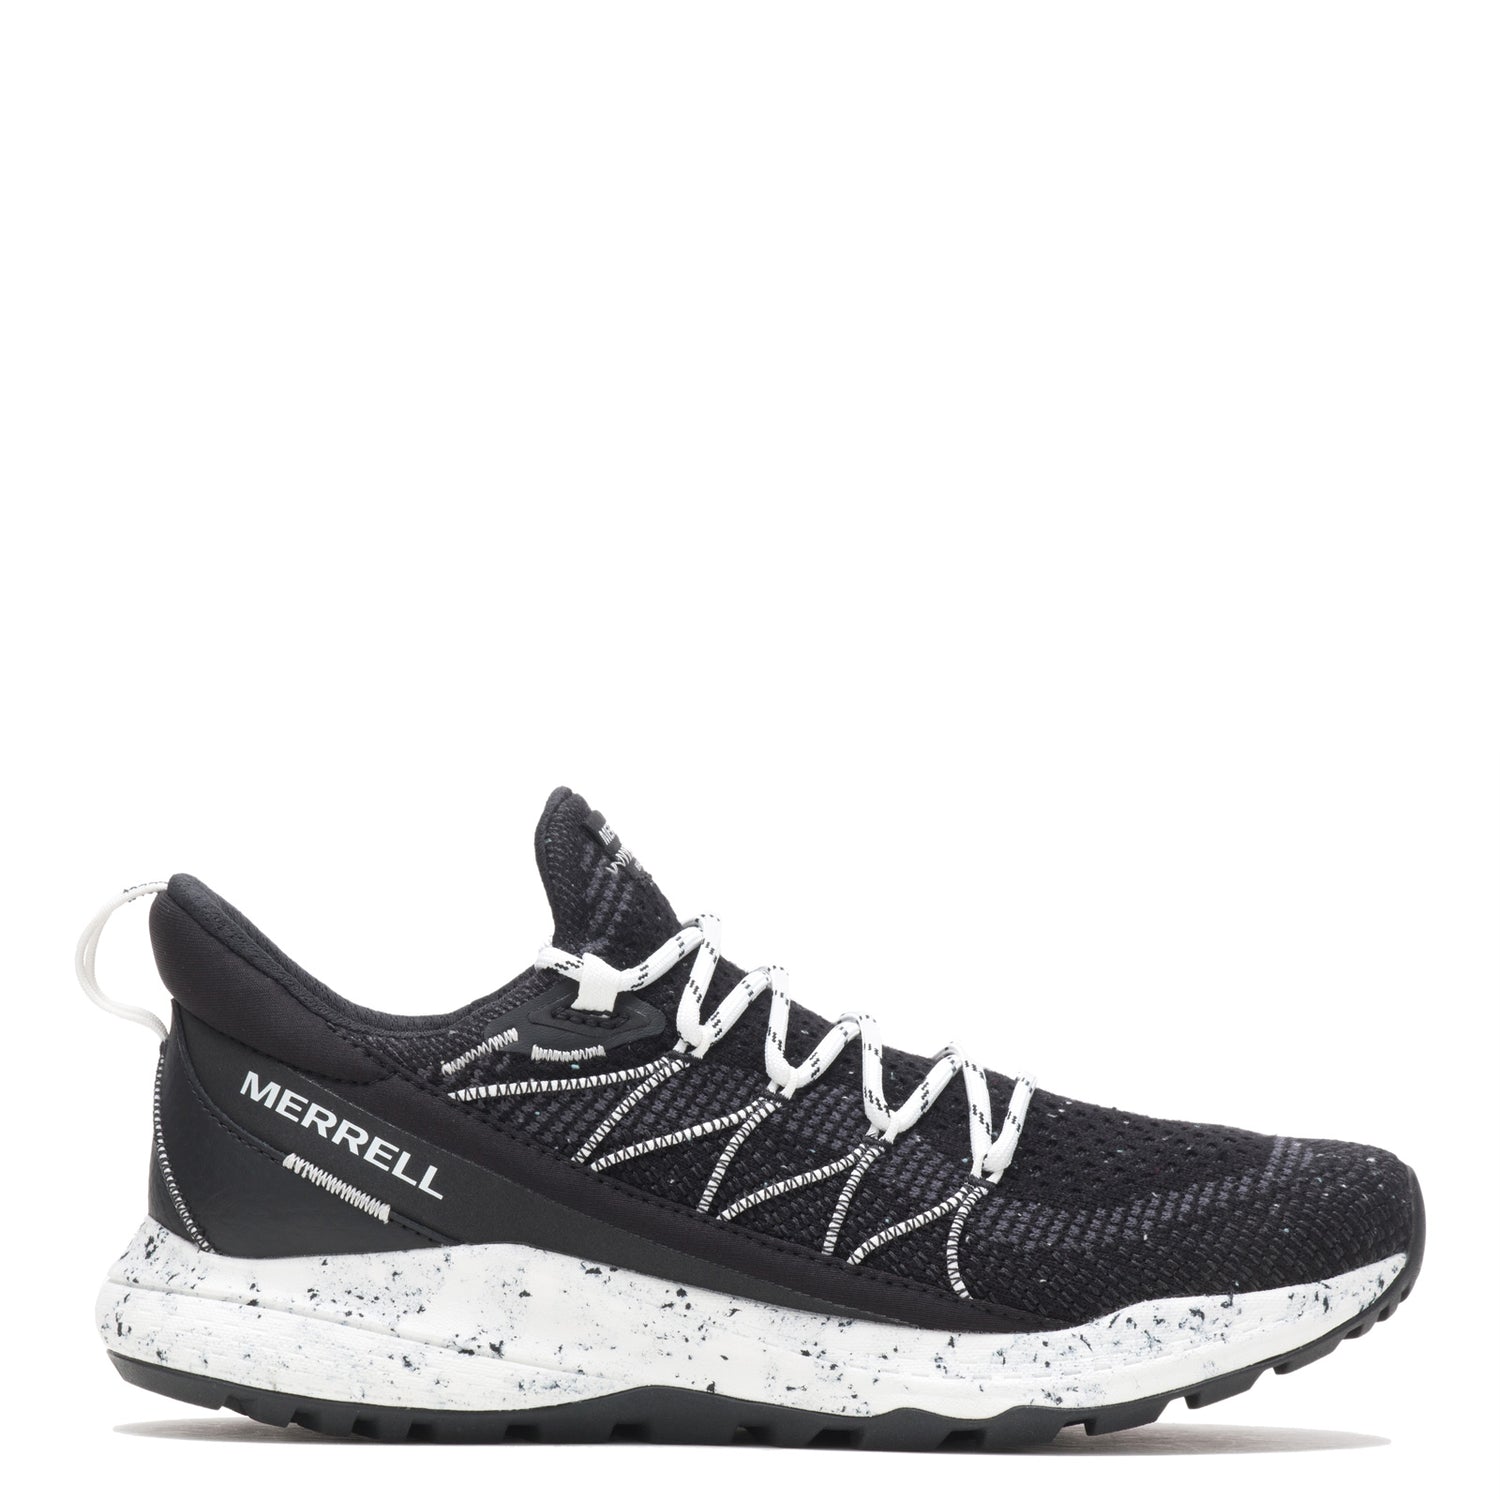 Running Shoes Vancouver - W Bravada Edge - Shop - The Right Shoe